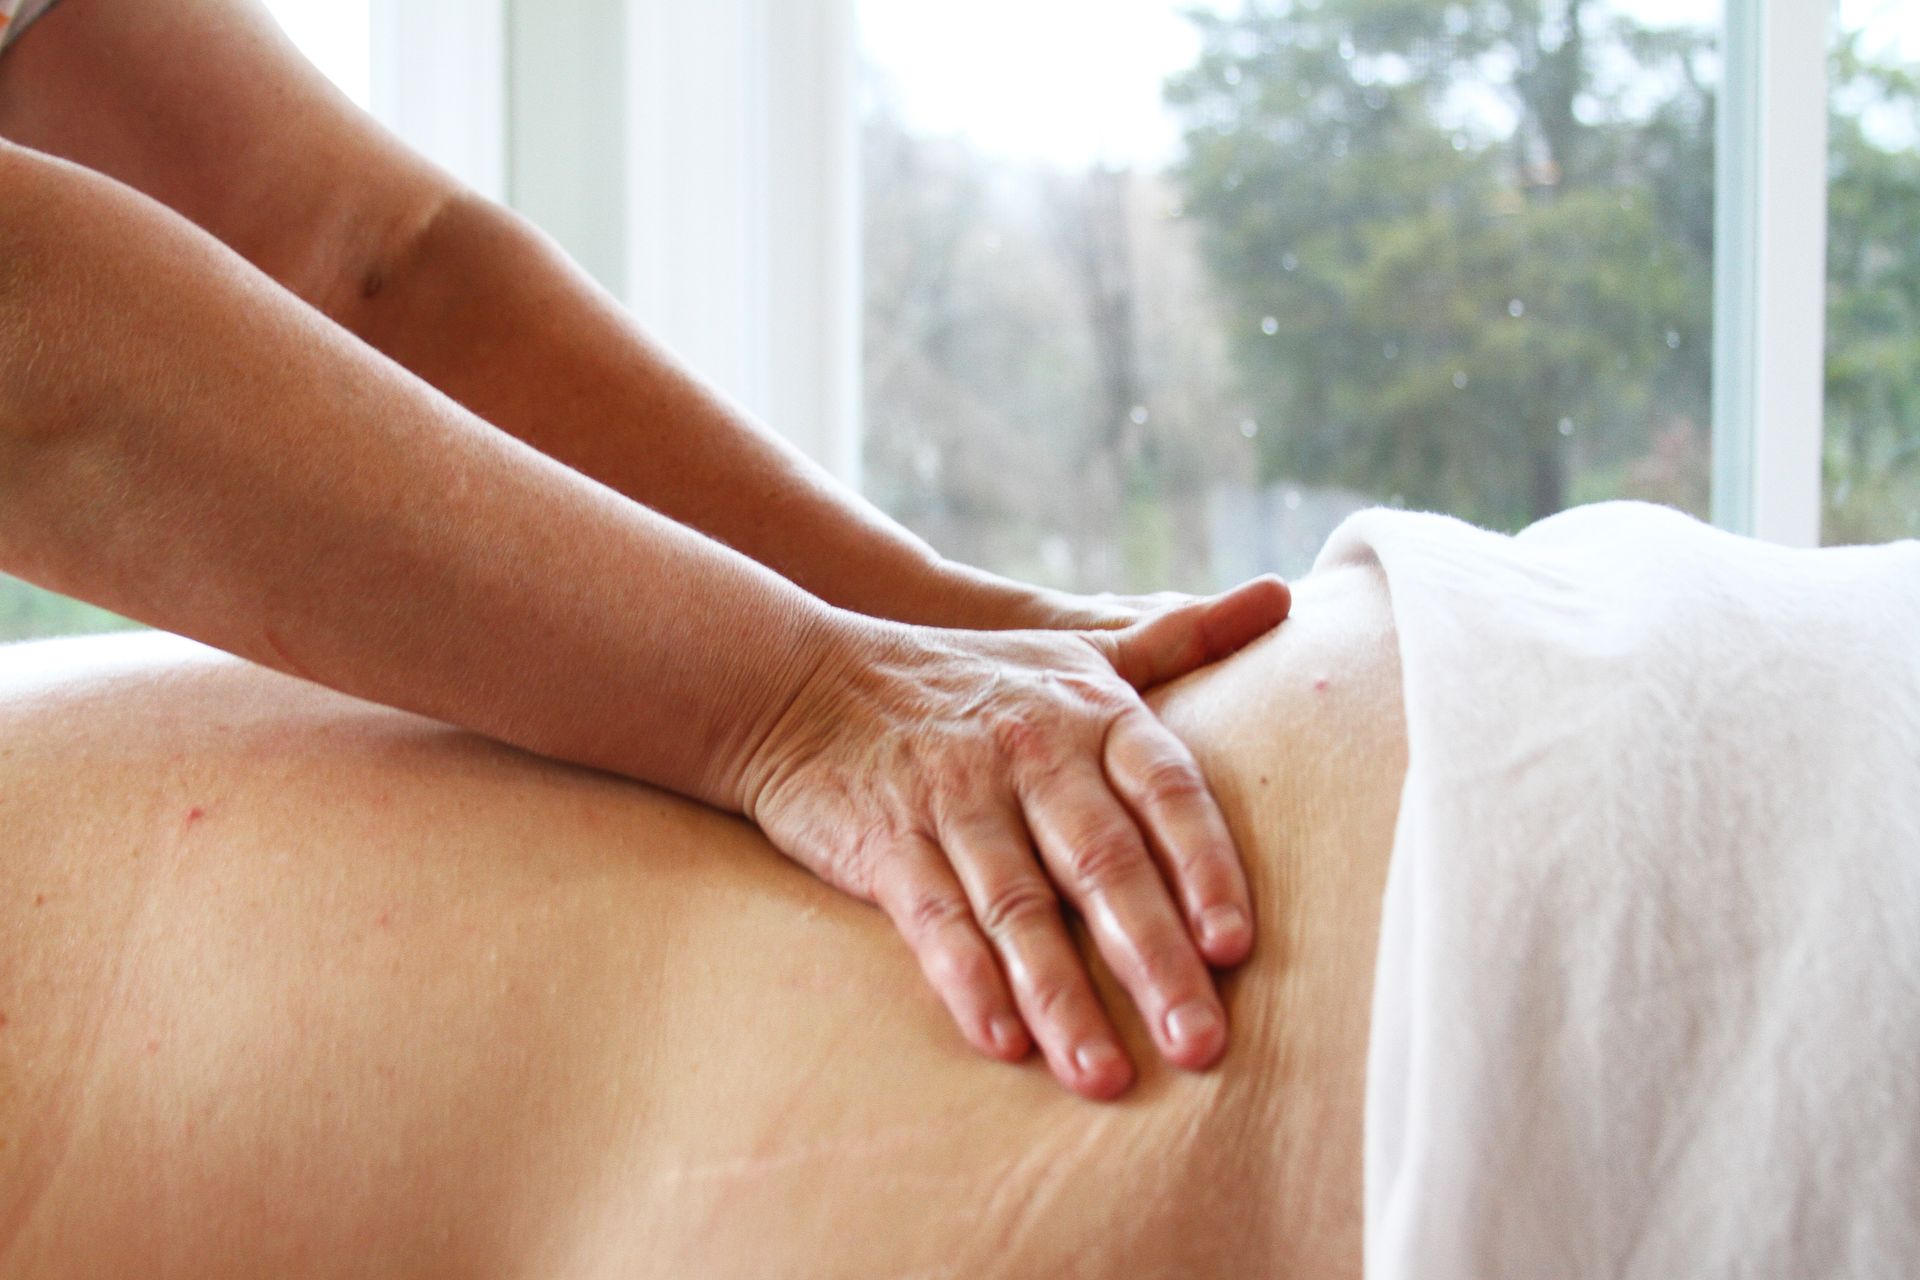 a woman is getting a deep tissue massage on her back in front of a window .